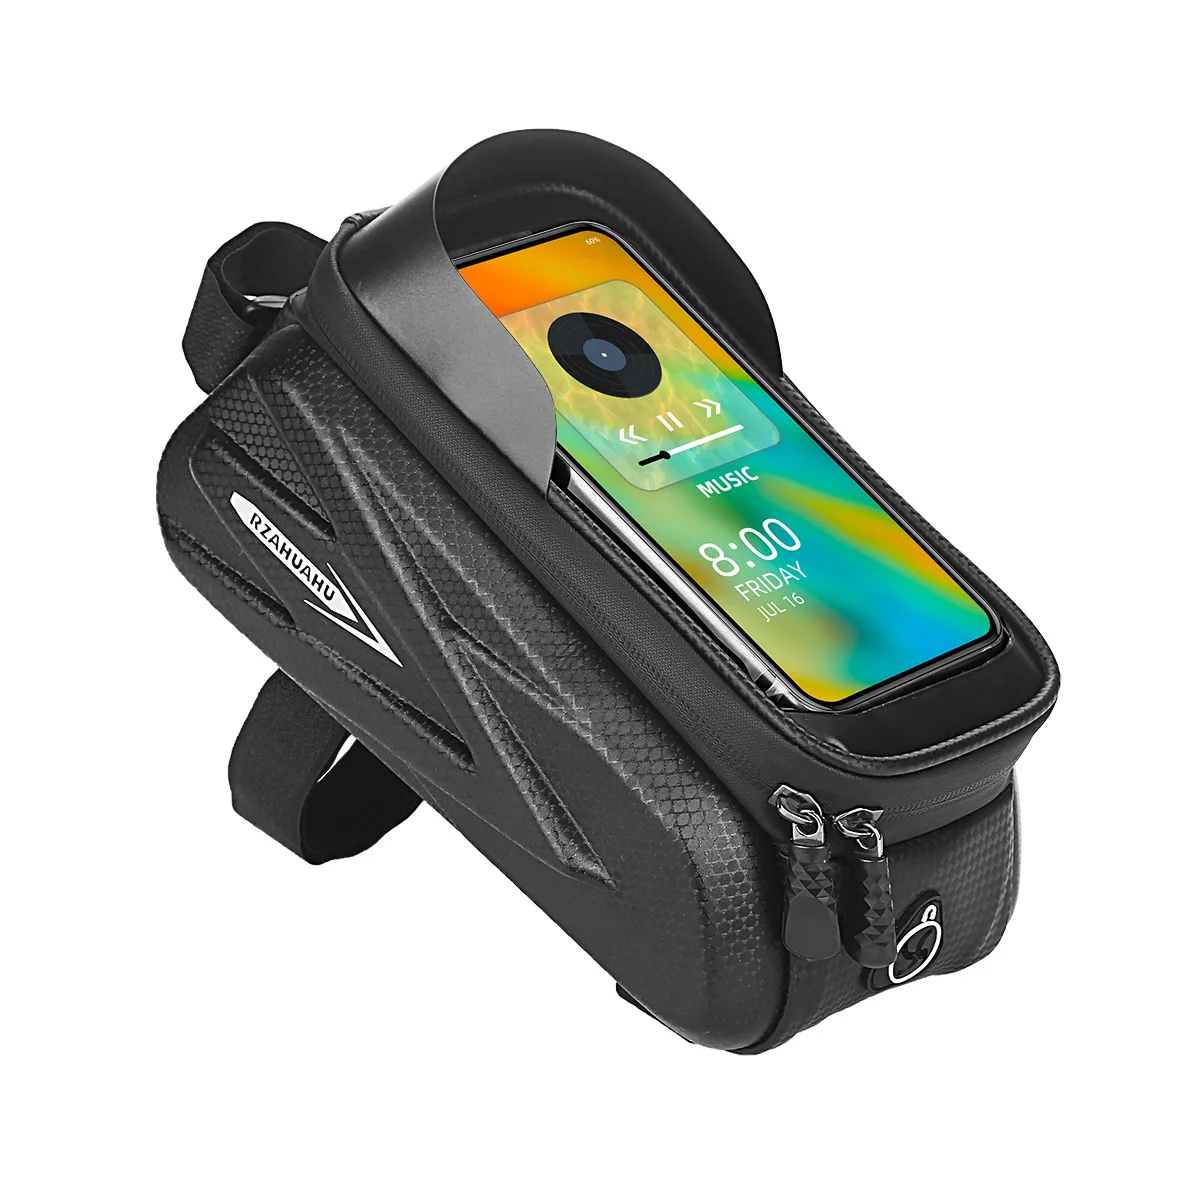 bicycle bag frame front top tube cycling bag waterproof 6 7 2in phone case touchscreen bag mtb bike bag bicycle accessories free global shipping